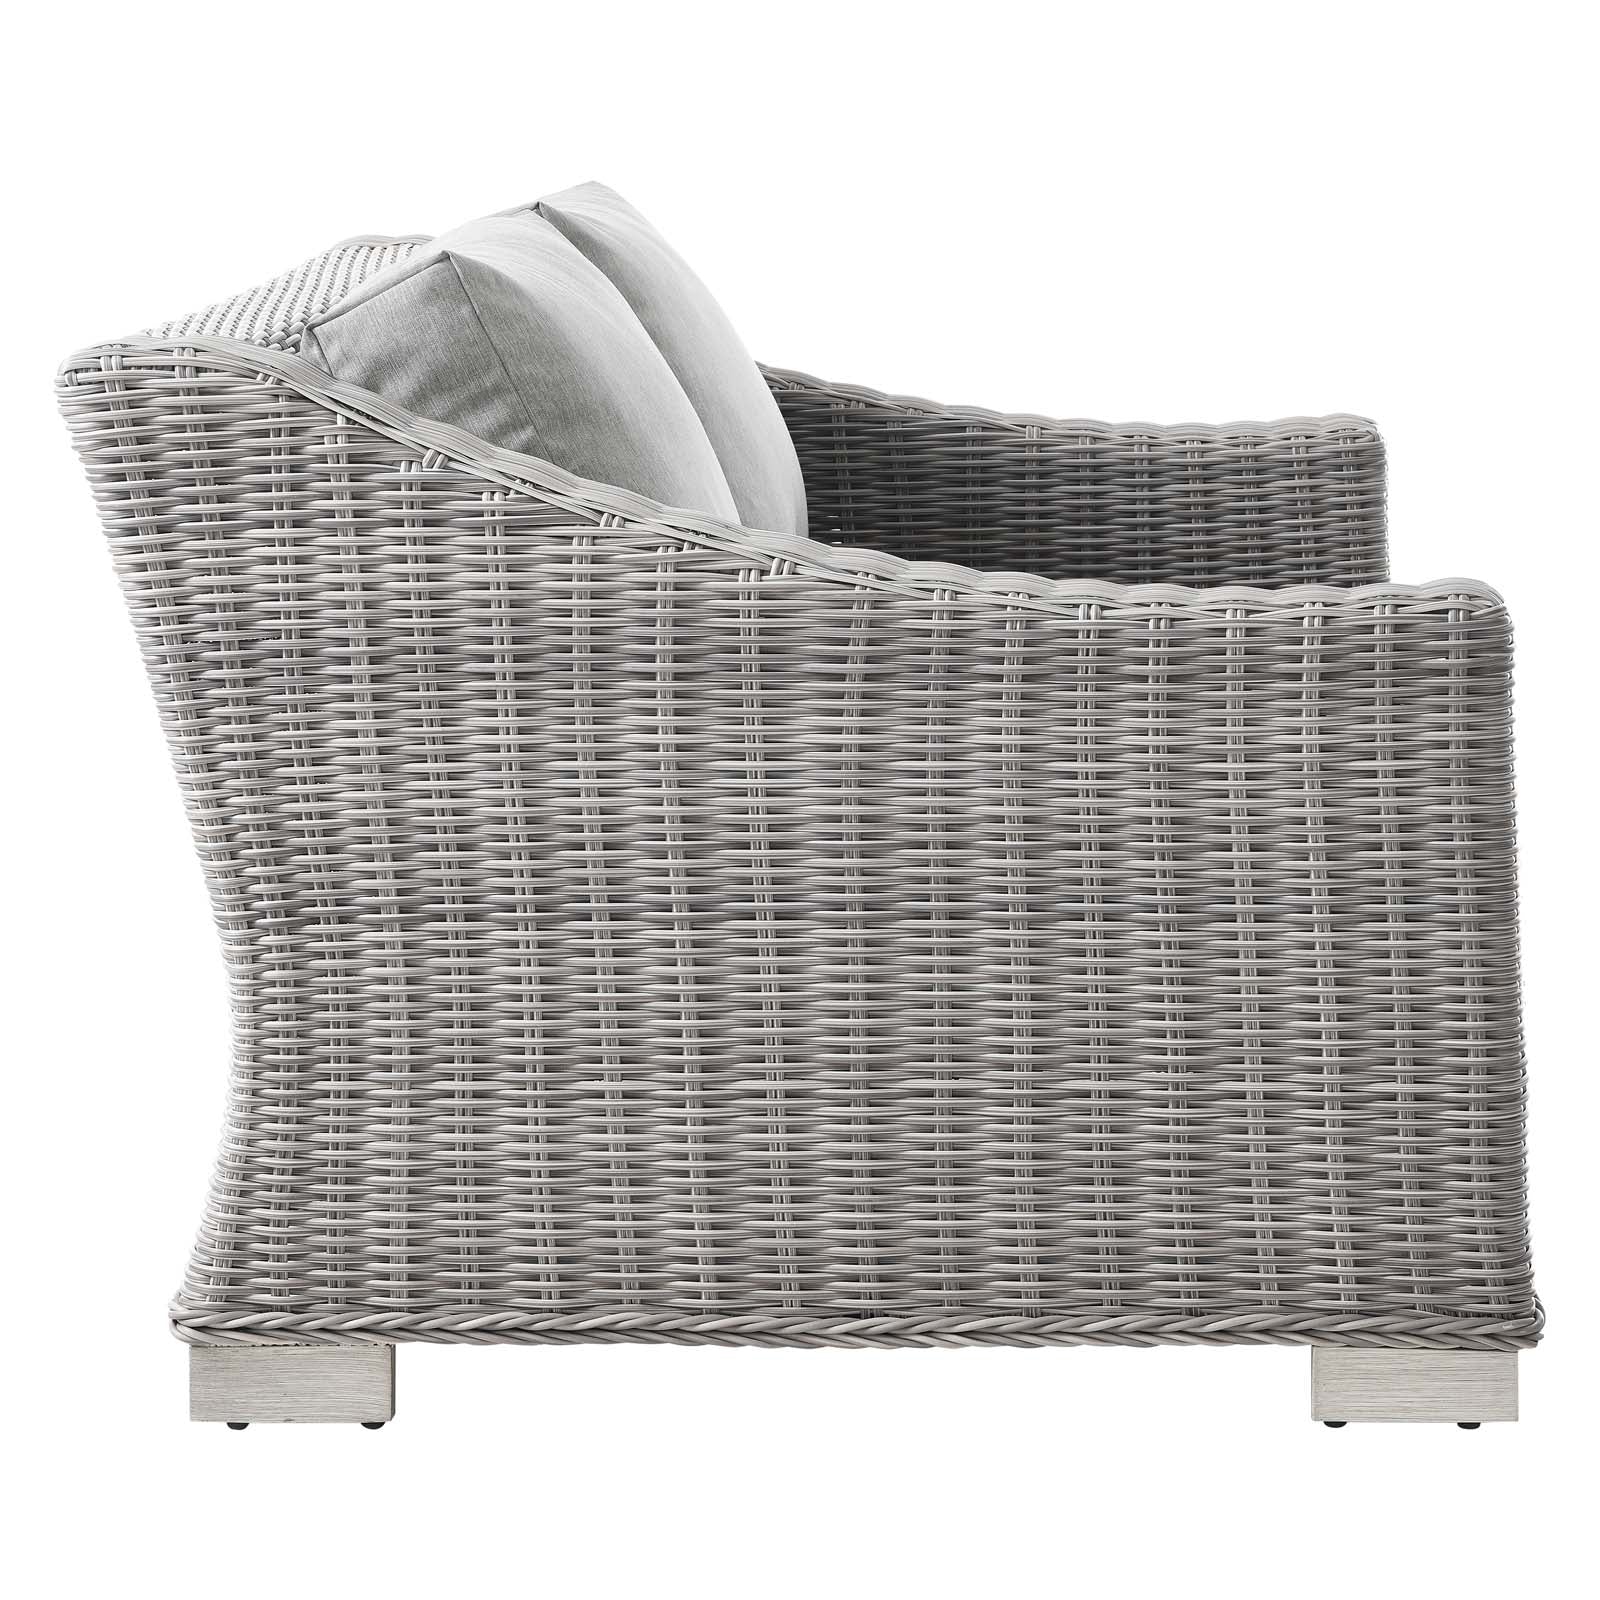 Modway Outdoor Sofas - Conway Outdoor Patio Wicker Rattan Loveseat Light Gray